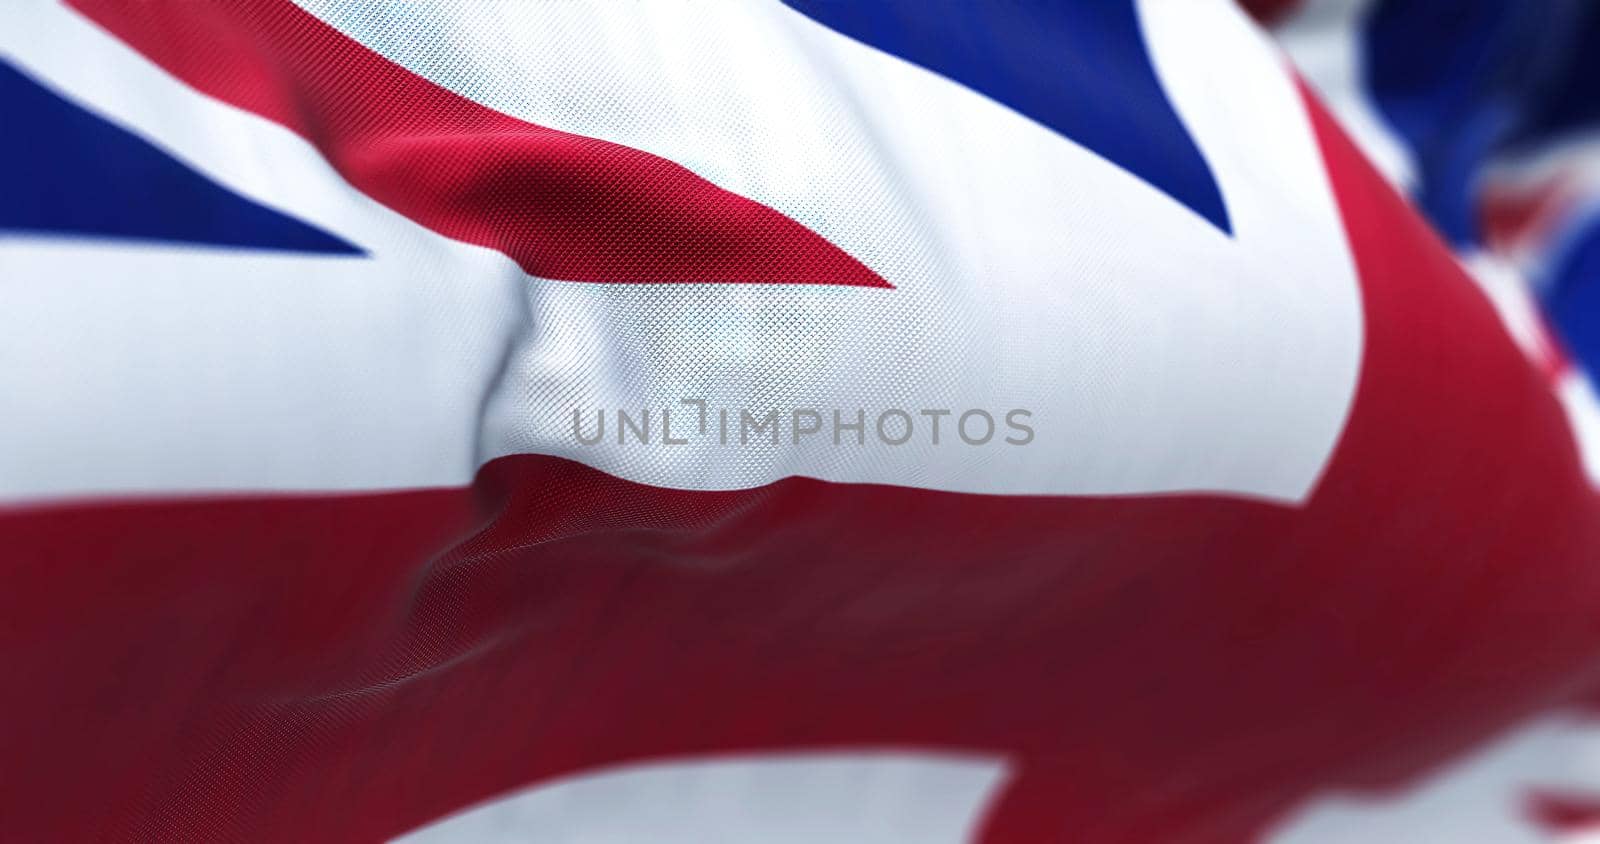 Close-up view of the United Kingdom flag waving in the wind. United Kingdom is a sovereign country that comprises England, Wales, Scotland, and Northern Ireland. Fabric background